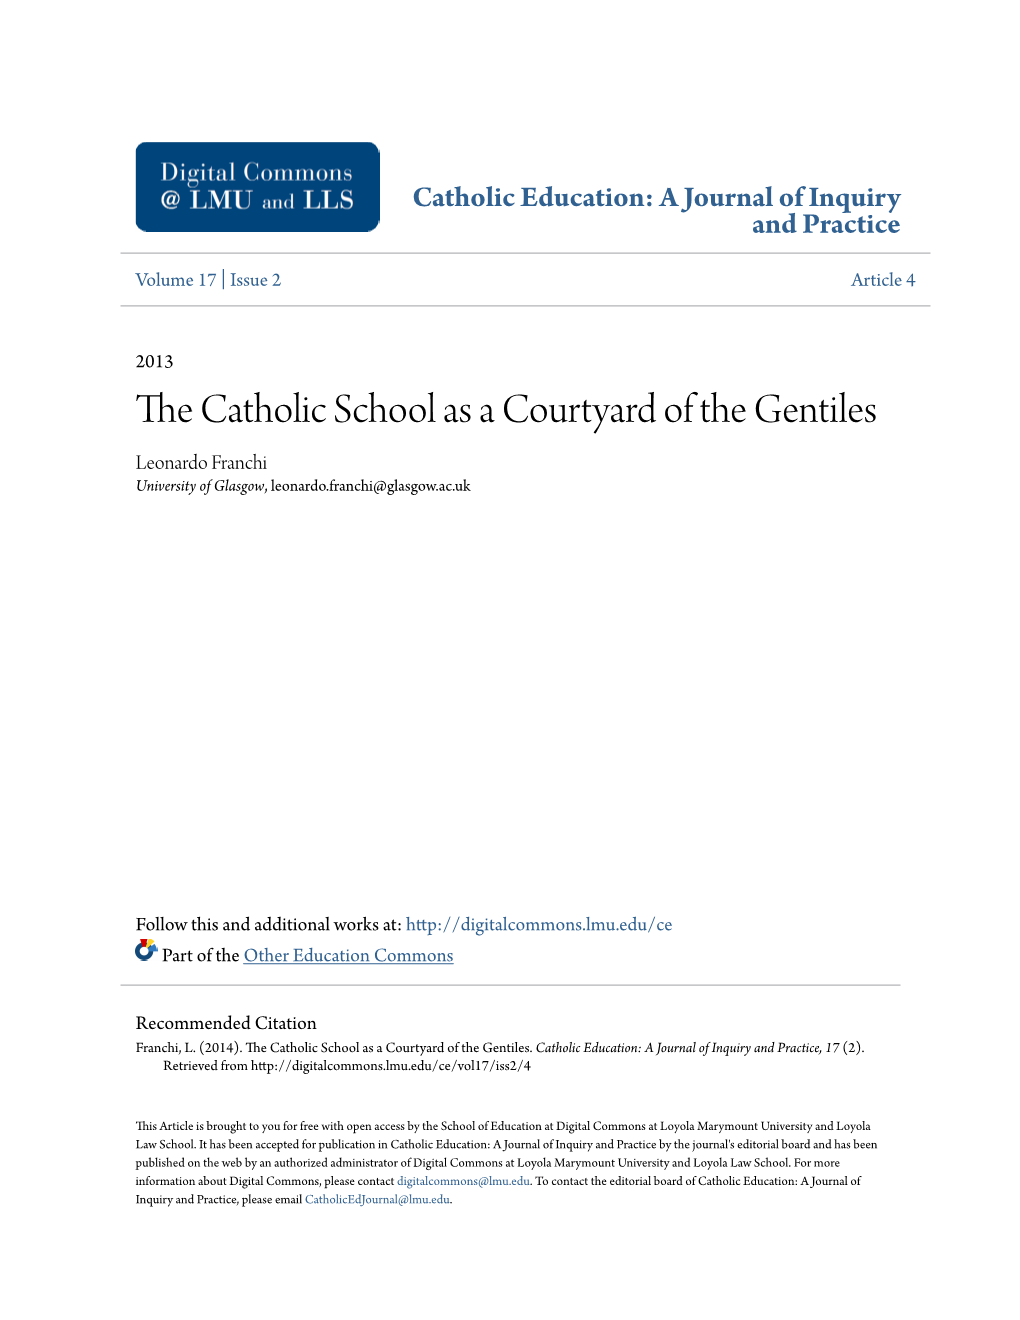 The Catholic School As a Courtyard of the Gentiles 57